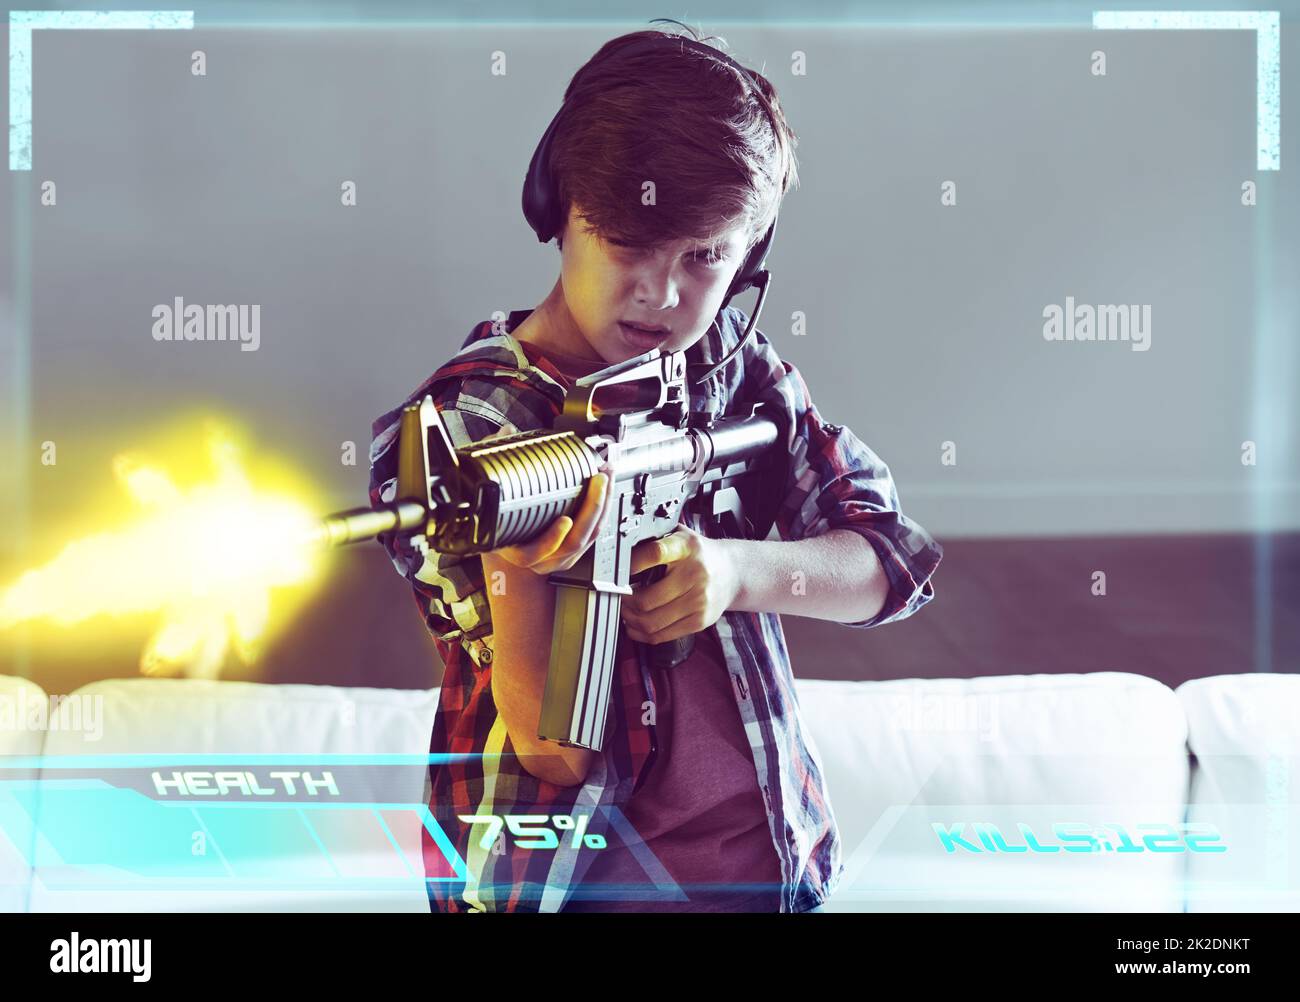 Call of duty. Shot of a young boy playing violent video games. Stock Photo